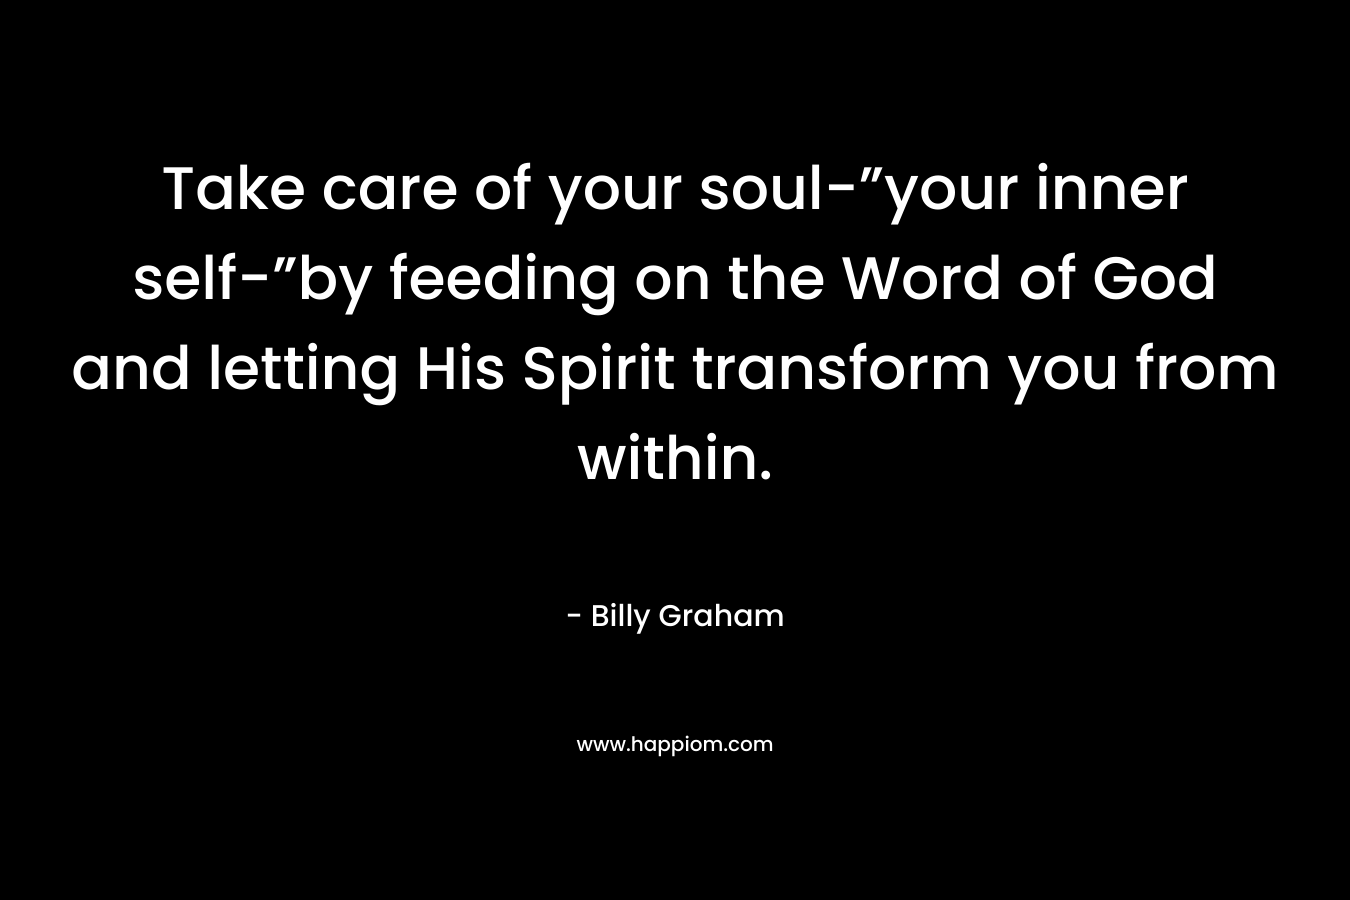 Take care of your soul-”your inner self-”by feeding on the Word of God and letting His Spirit transform you from within.